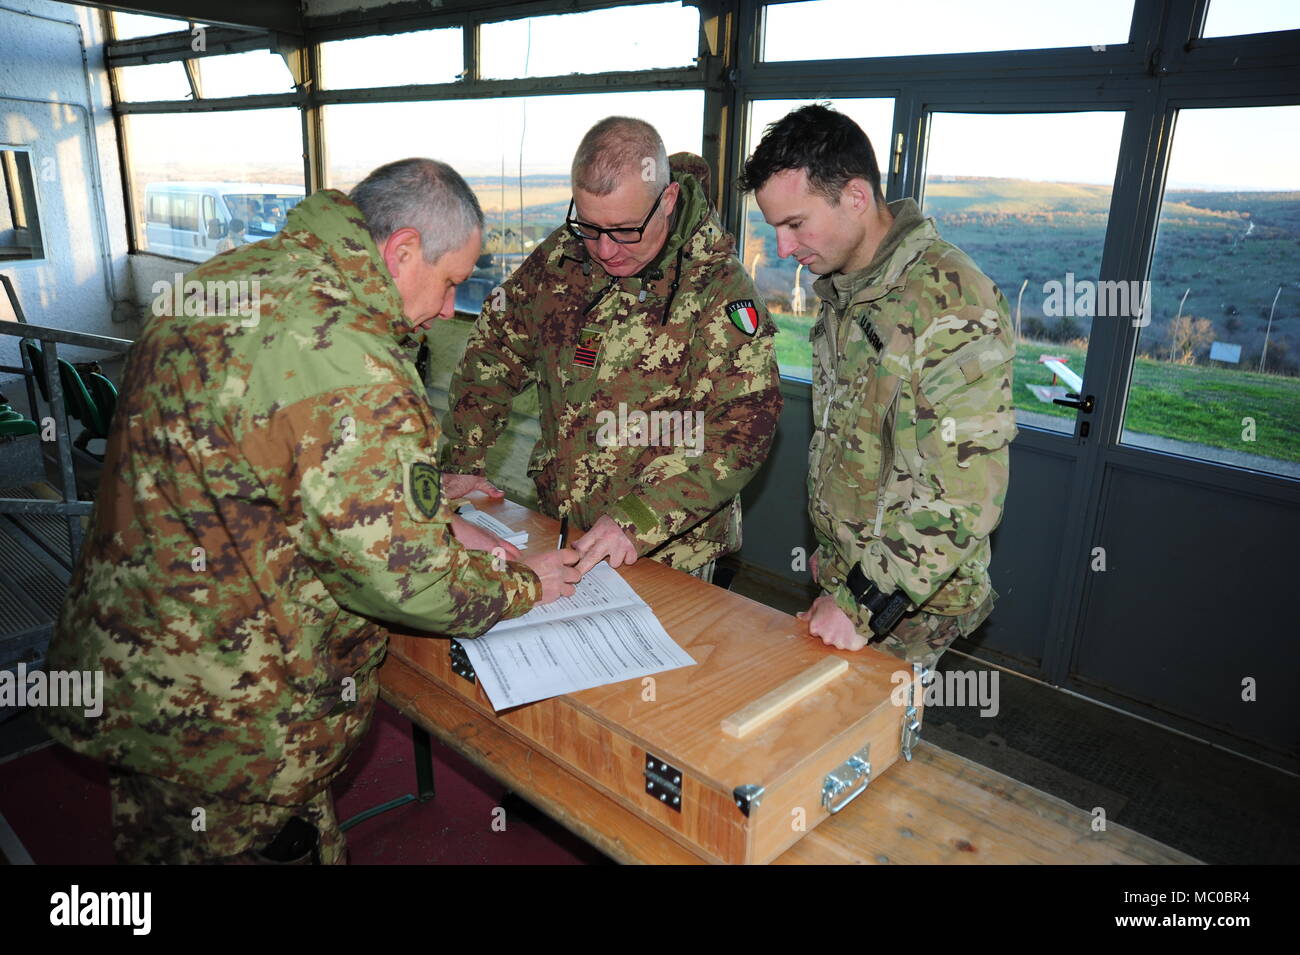 From left, Italian Army 1st Lgt. Giulio Fabbri, Director of Monte Romano Training Area, Italian Army Sgm. Massimo Giordano, liaison officer USA SETAF G3 Vicenza and 1st Lt. Jonathan P. MesserJan, plan the activity during the Exercise Baree  Jan. 18, 2018, Monte Romano training area, Italy. (photo by Elena Baladellireleased). Stock Photo